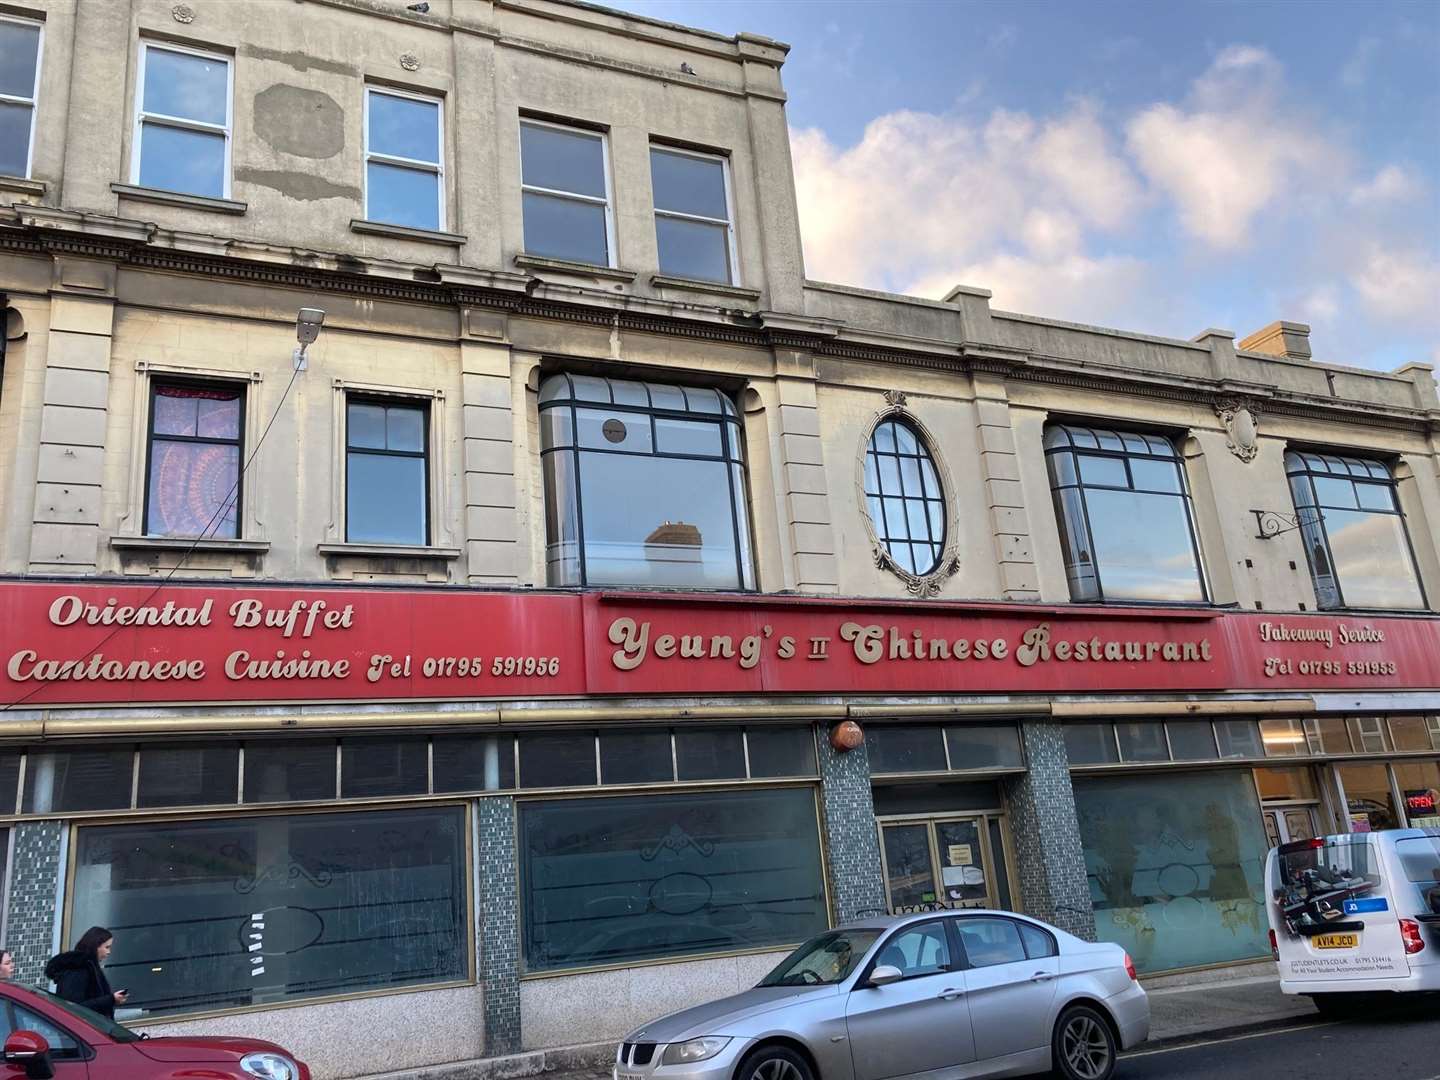 The old Yeung’s restaurant could become the town's largest dental surgery